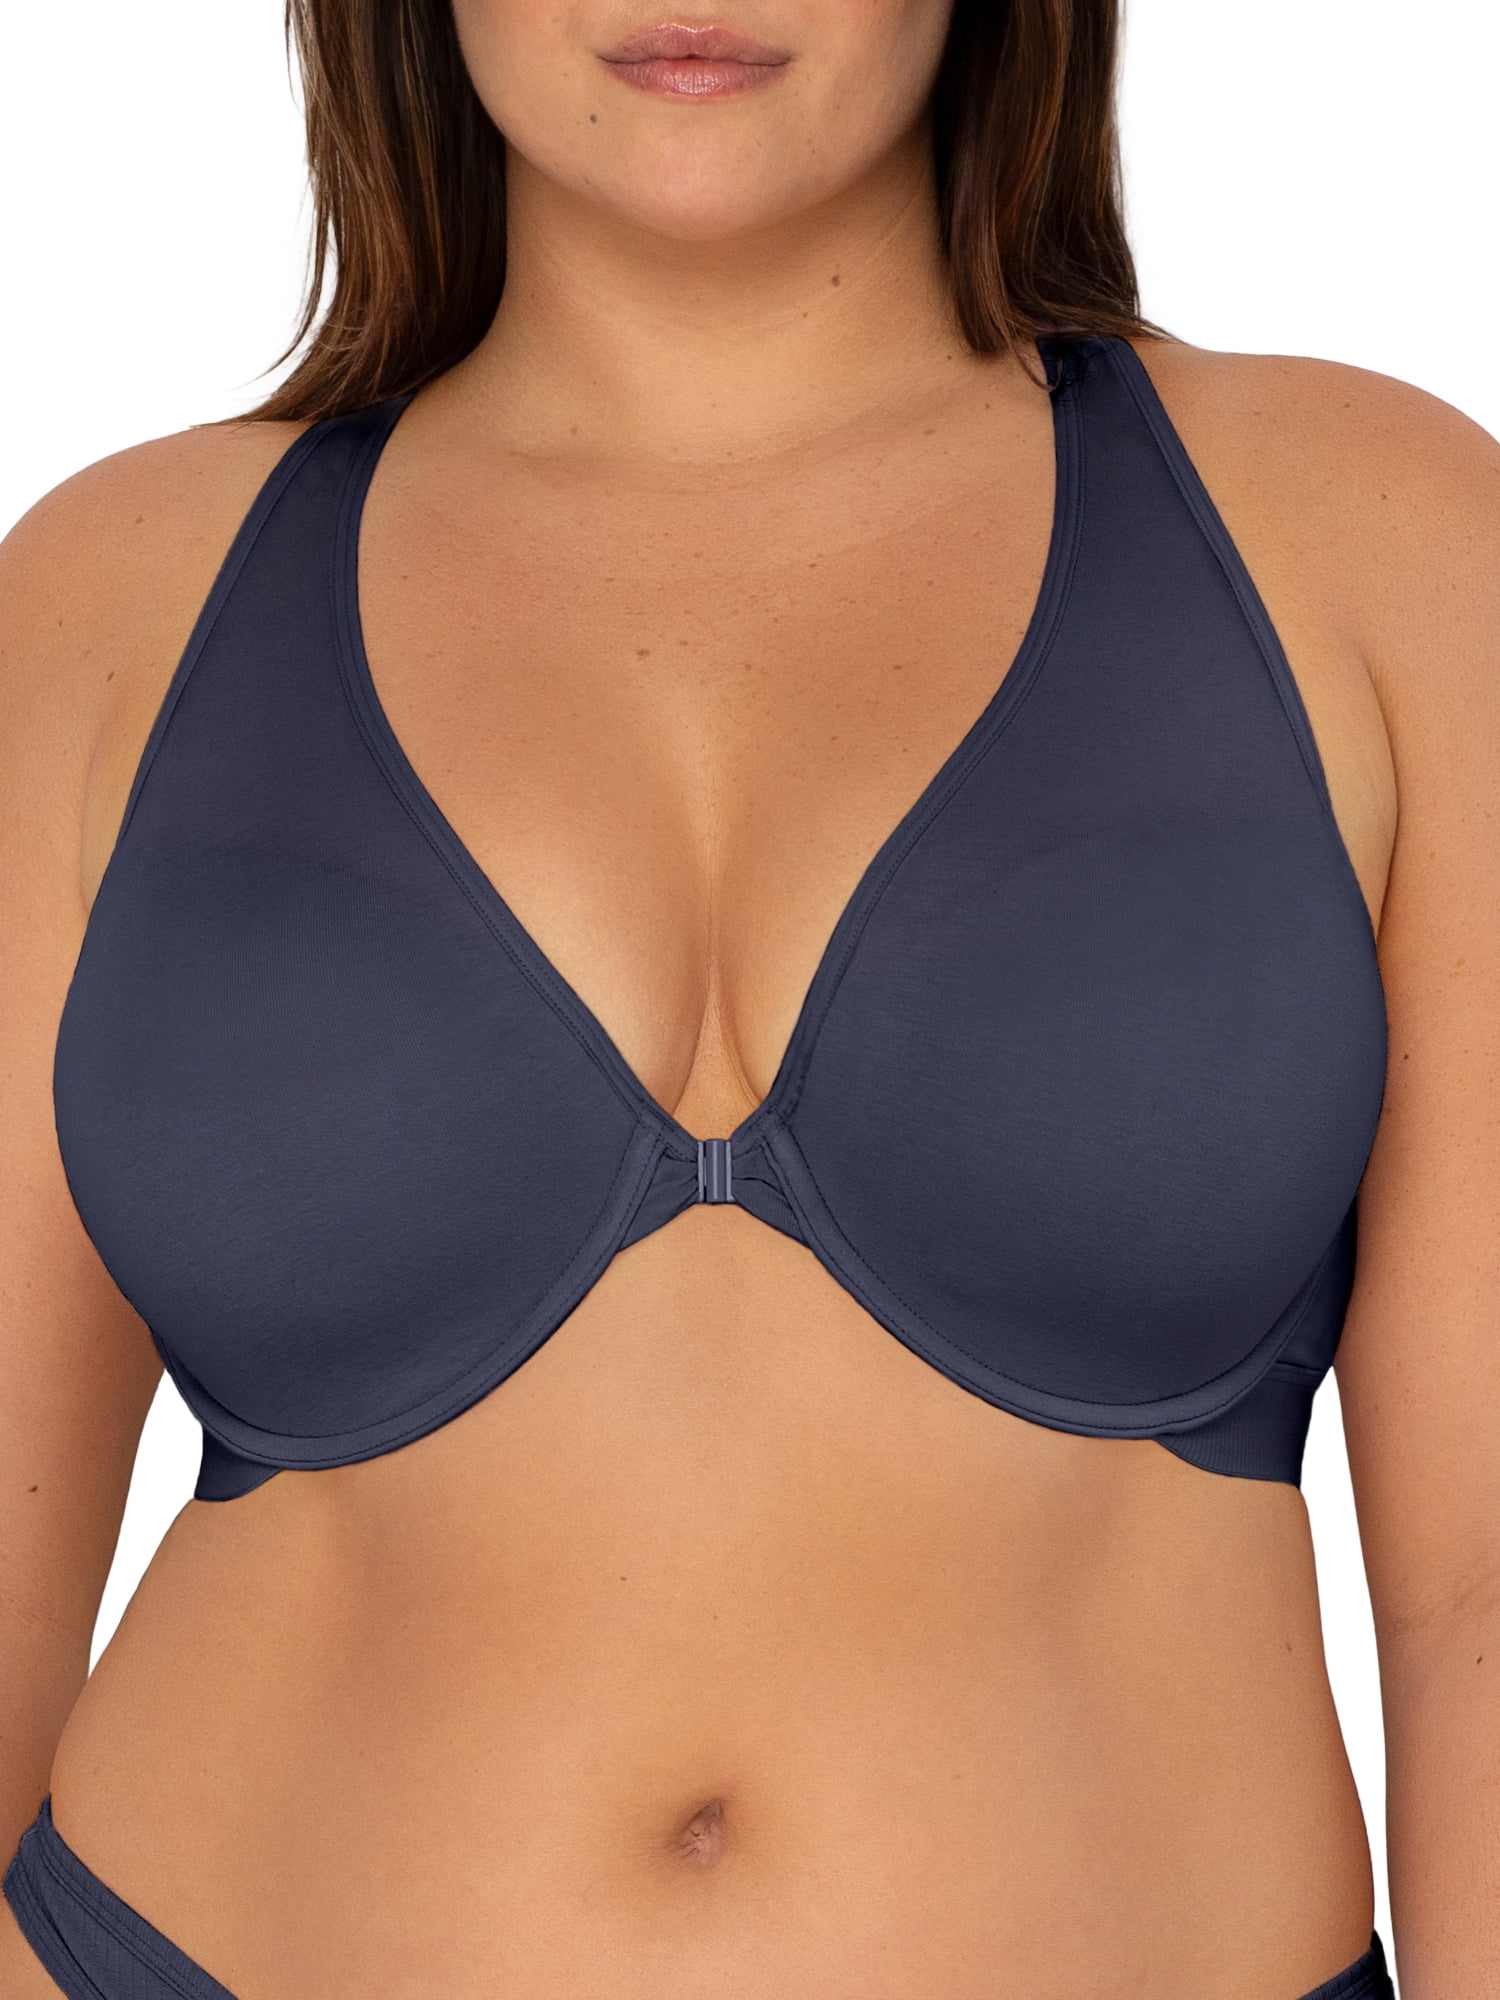 Shop Zappos Women's Racerback Bras up to 60% Off